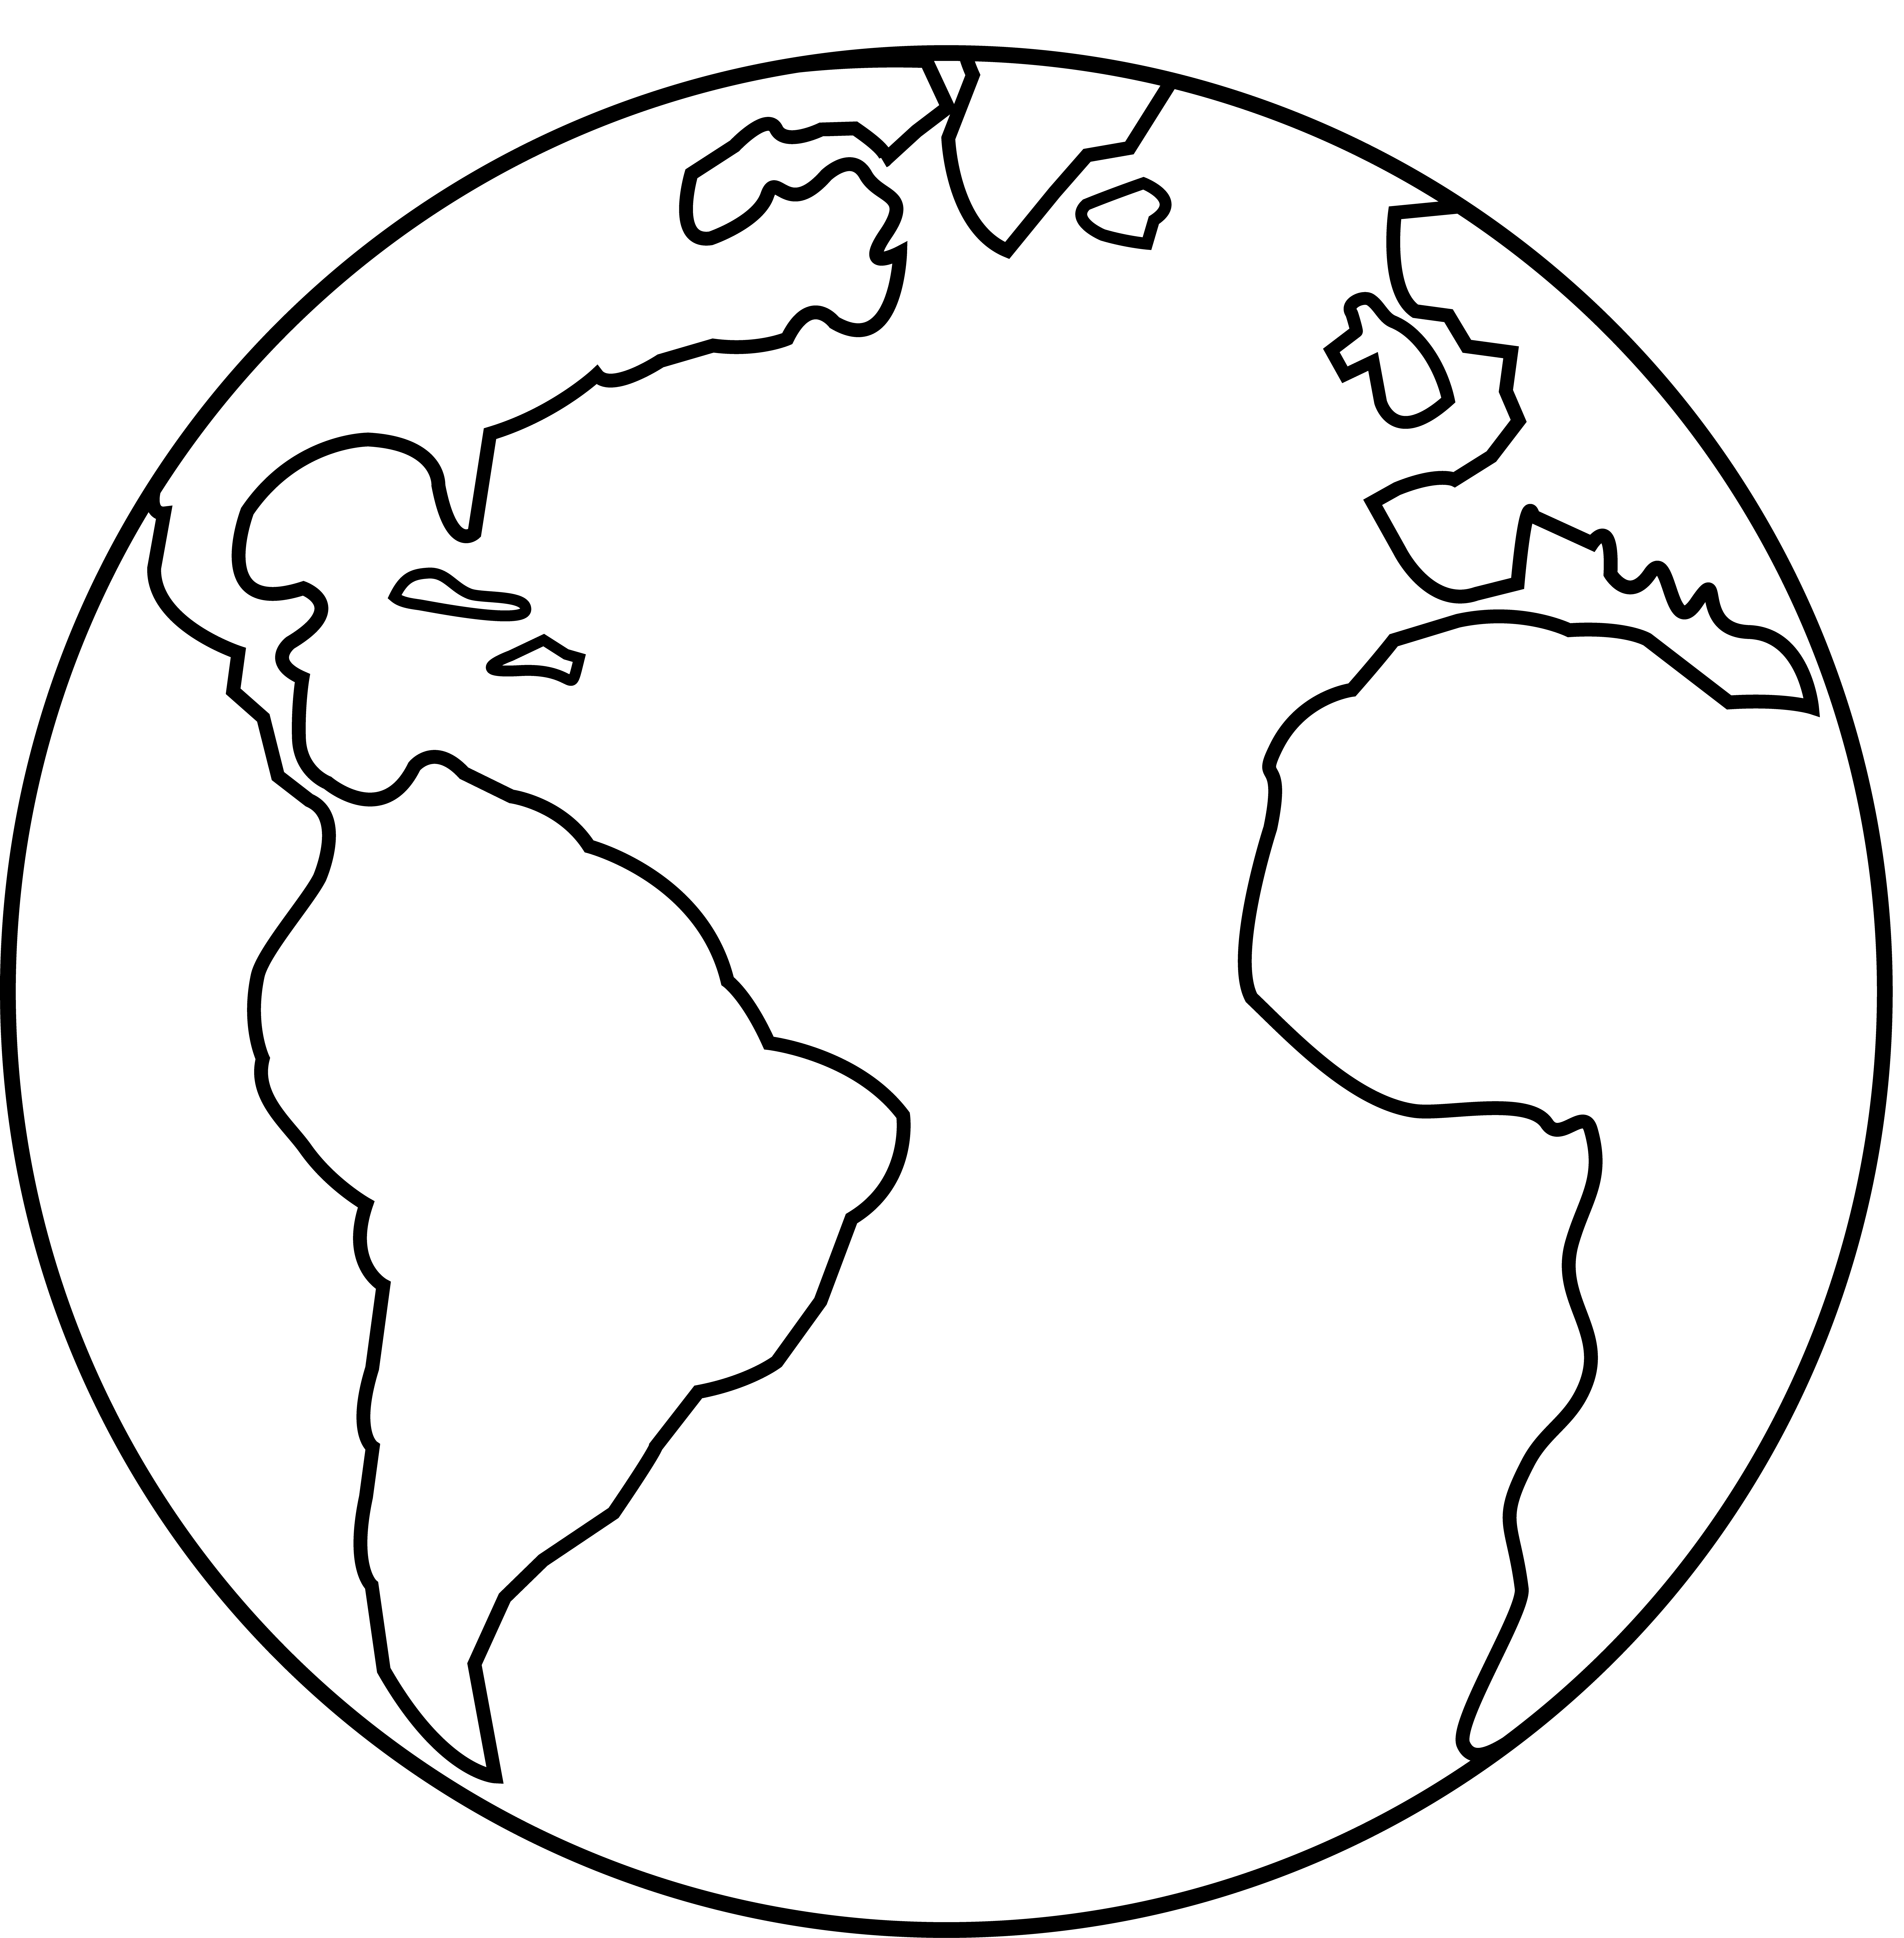 Simple Earth Drawing Images & Pictures - Becuo